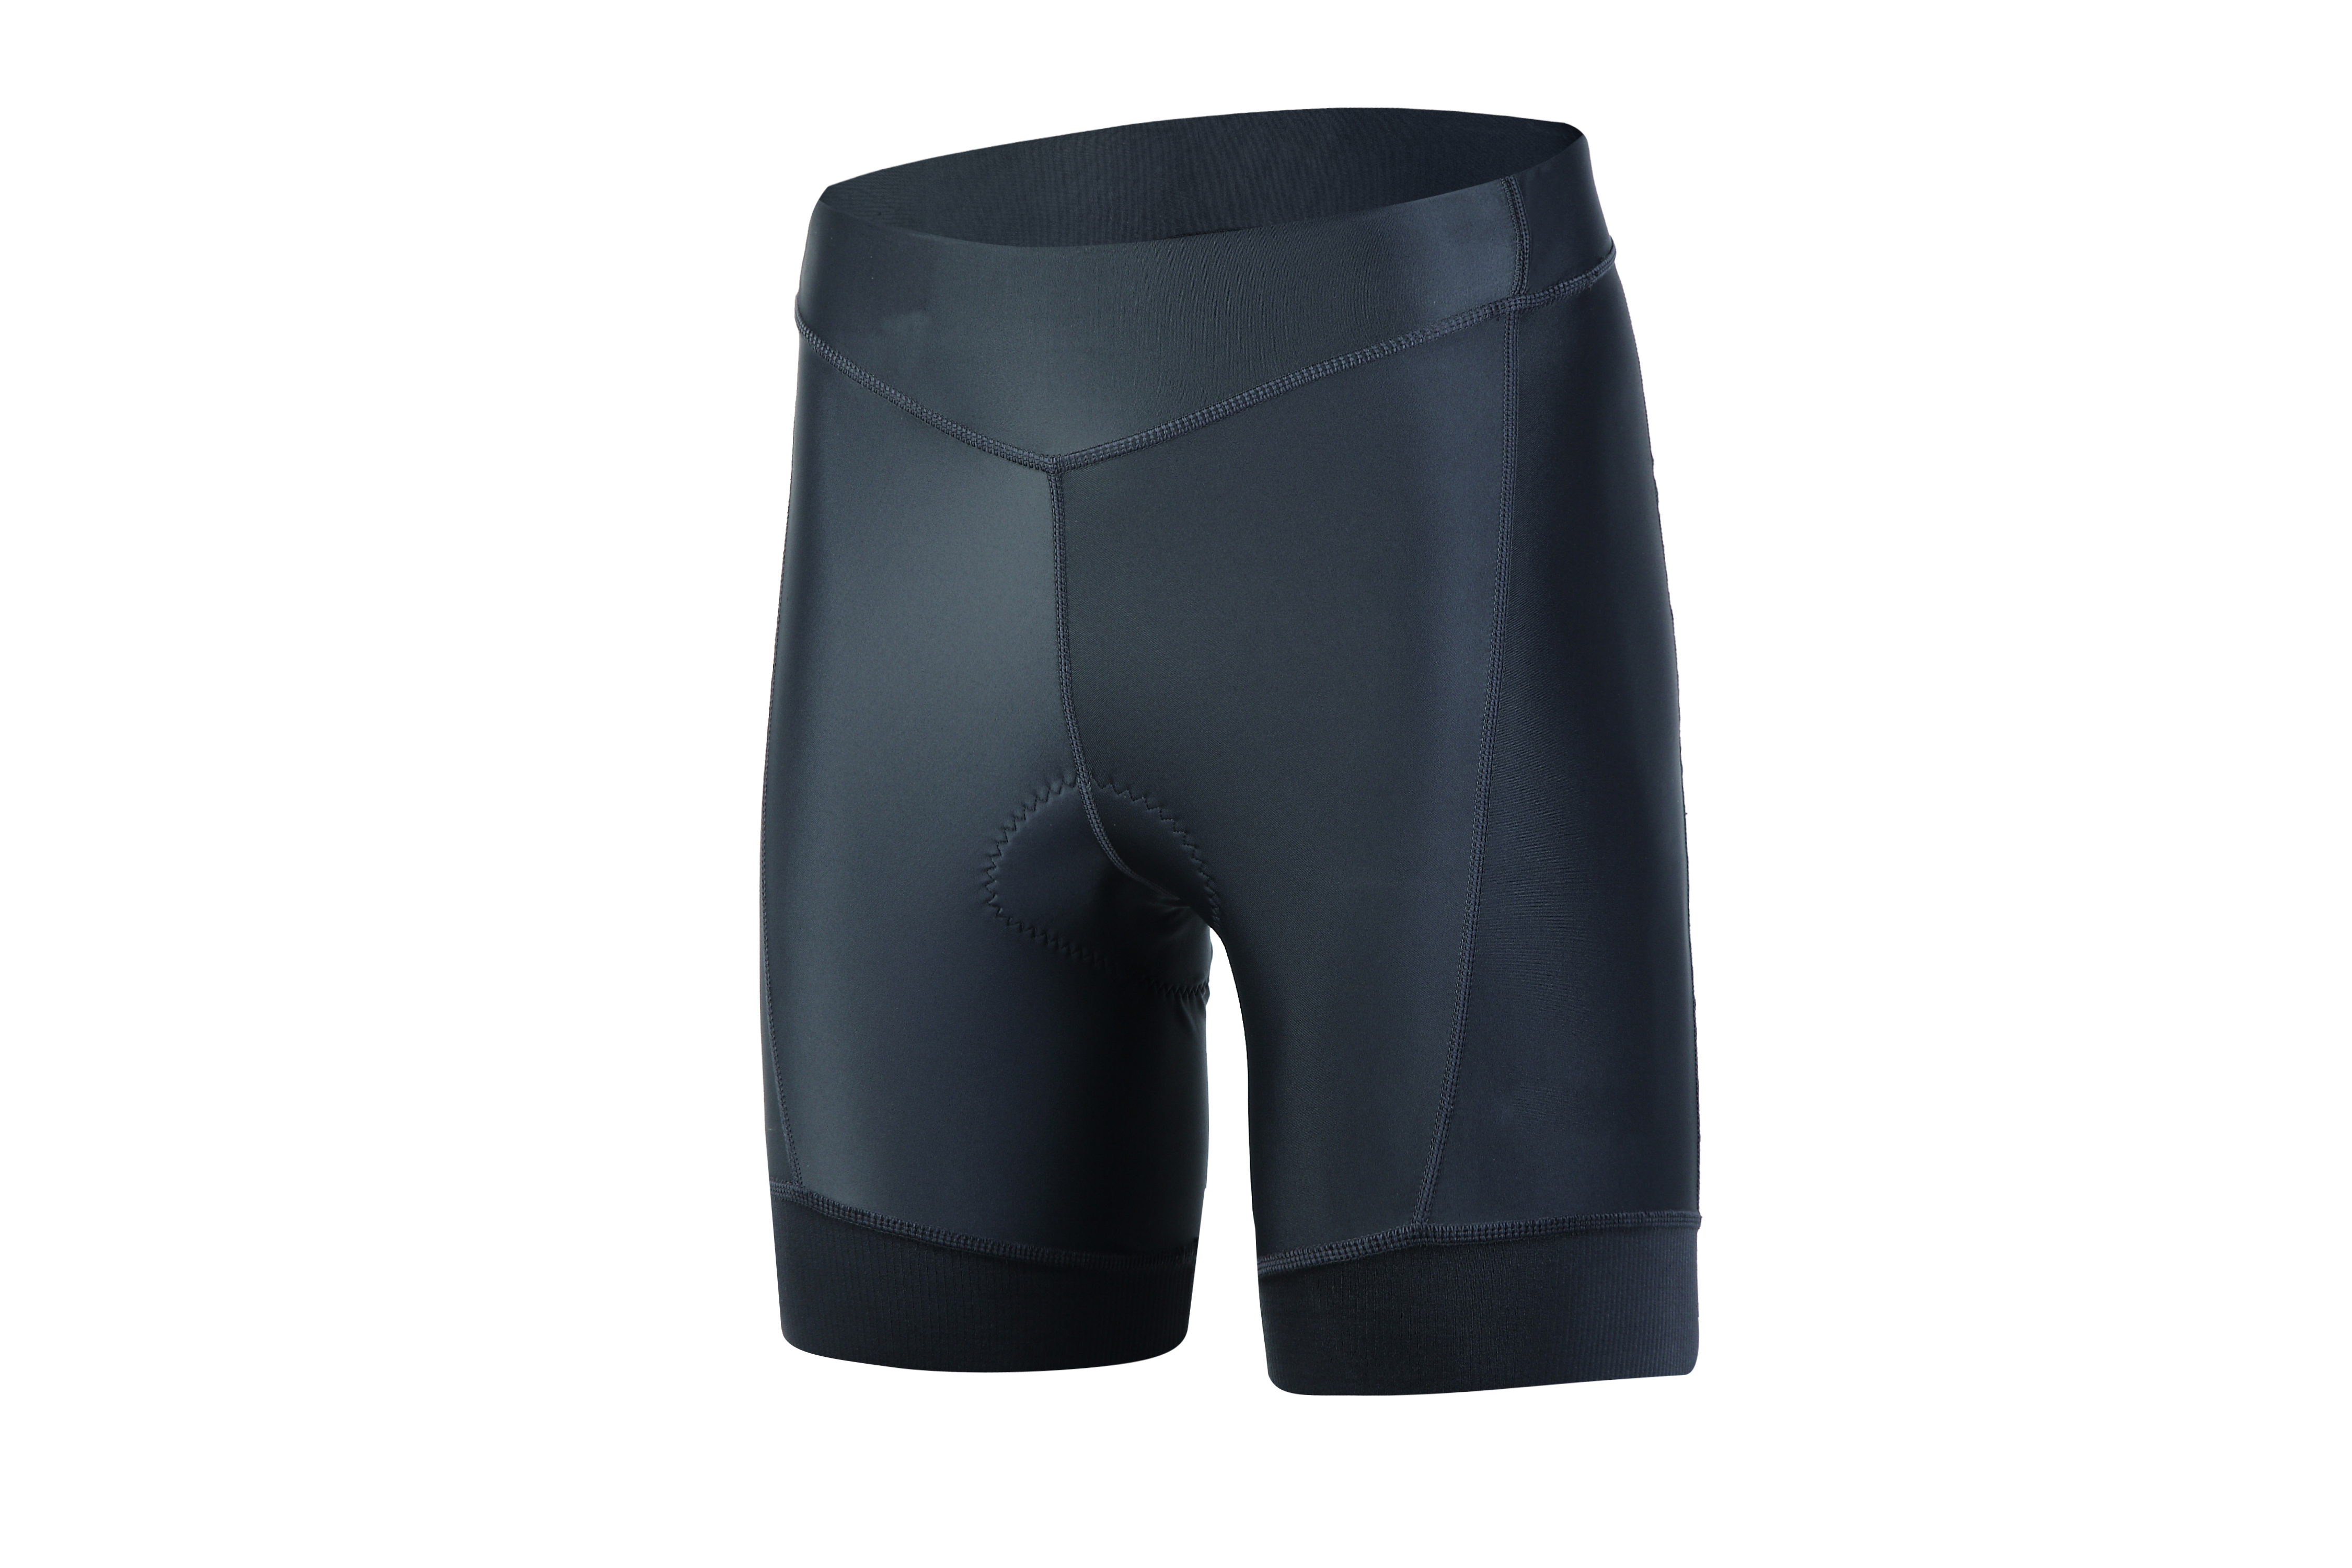 Women’s knitted cycling Shorts.